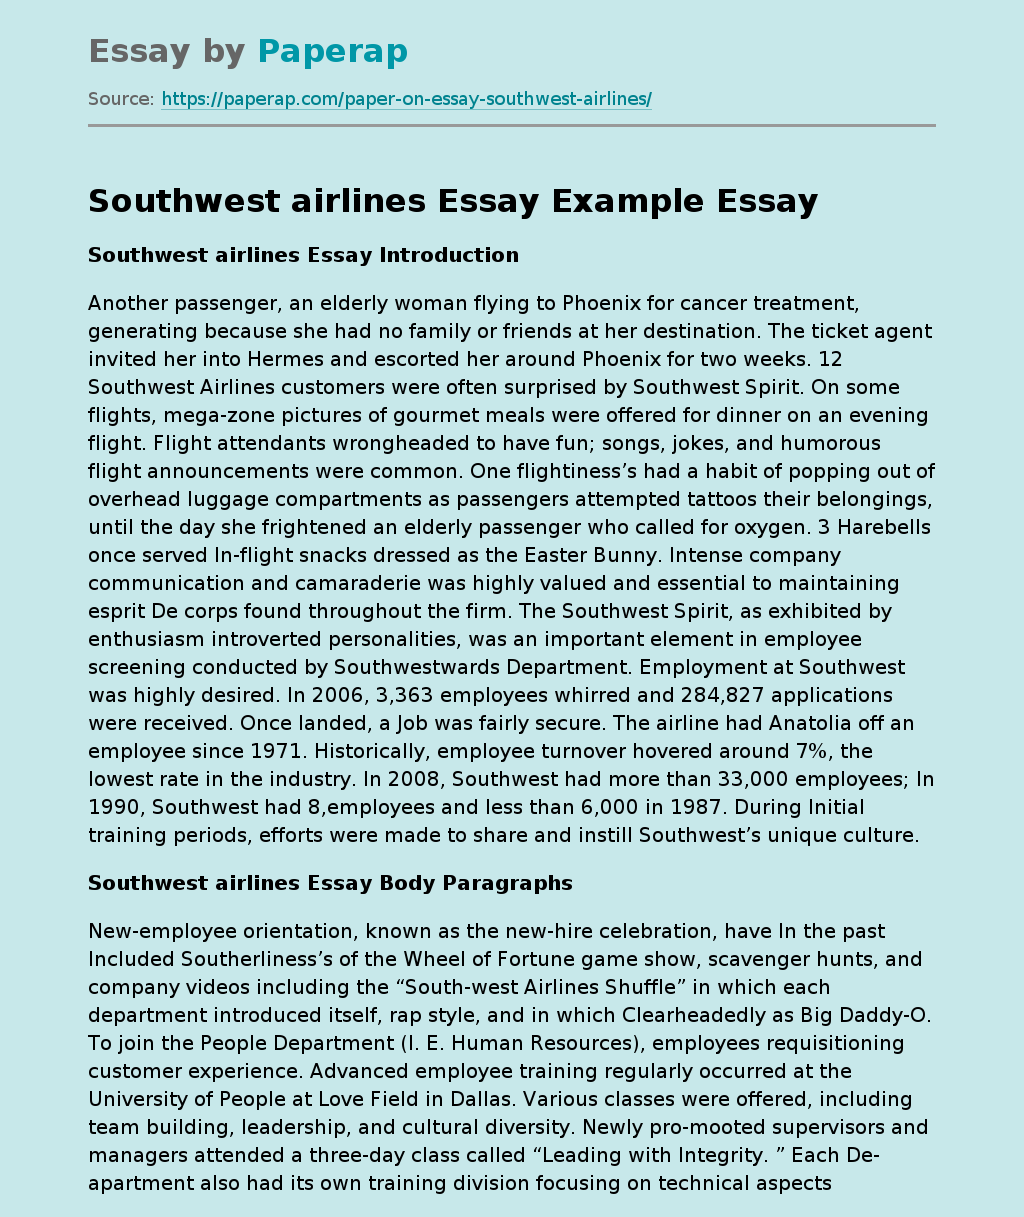 Southwest airlines Essay Example